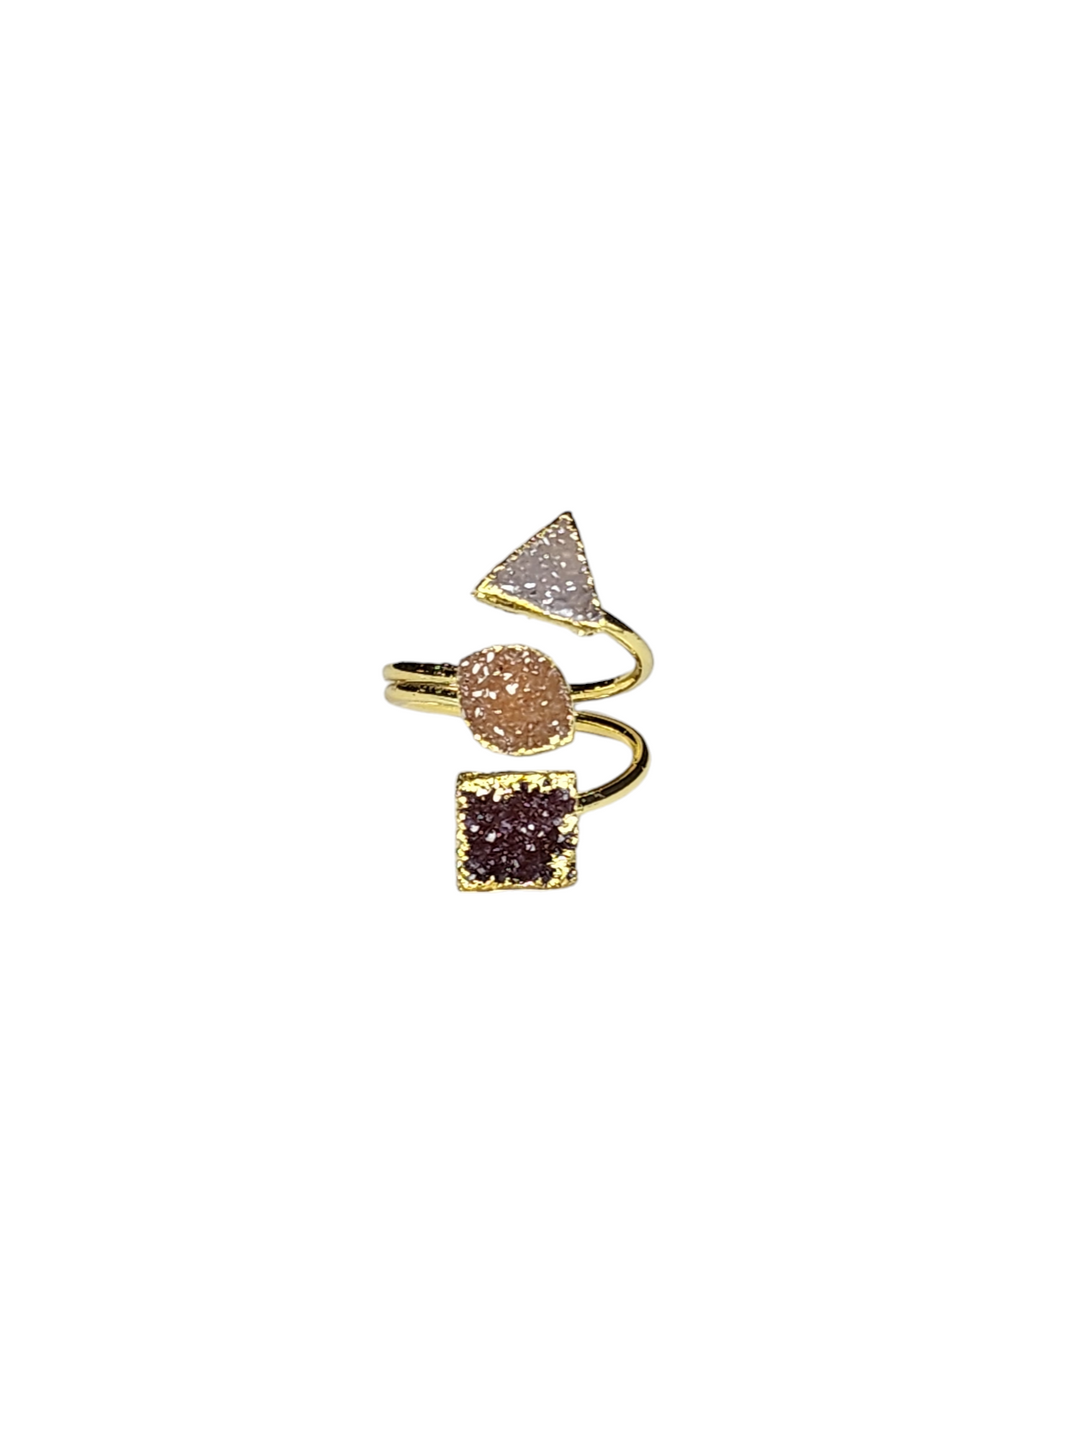 The Jane Gold Triple Druzy Ring Collection